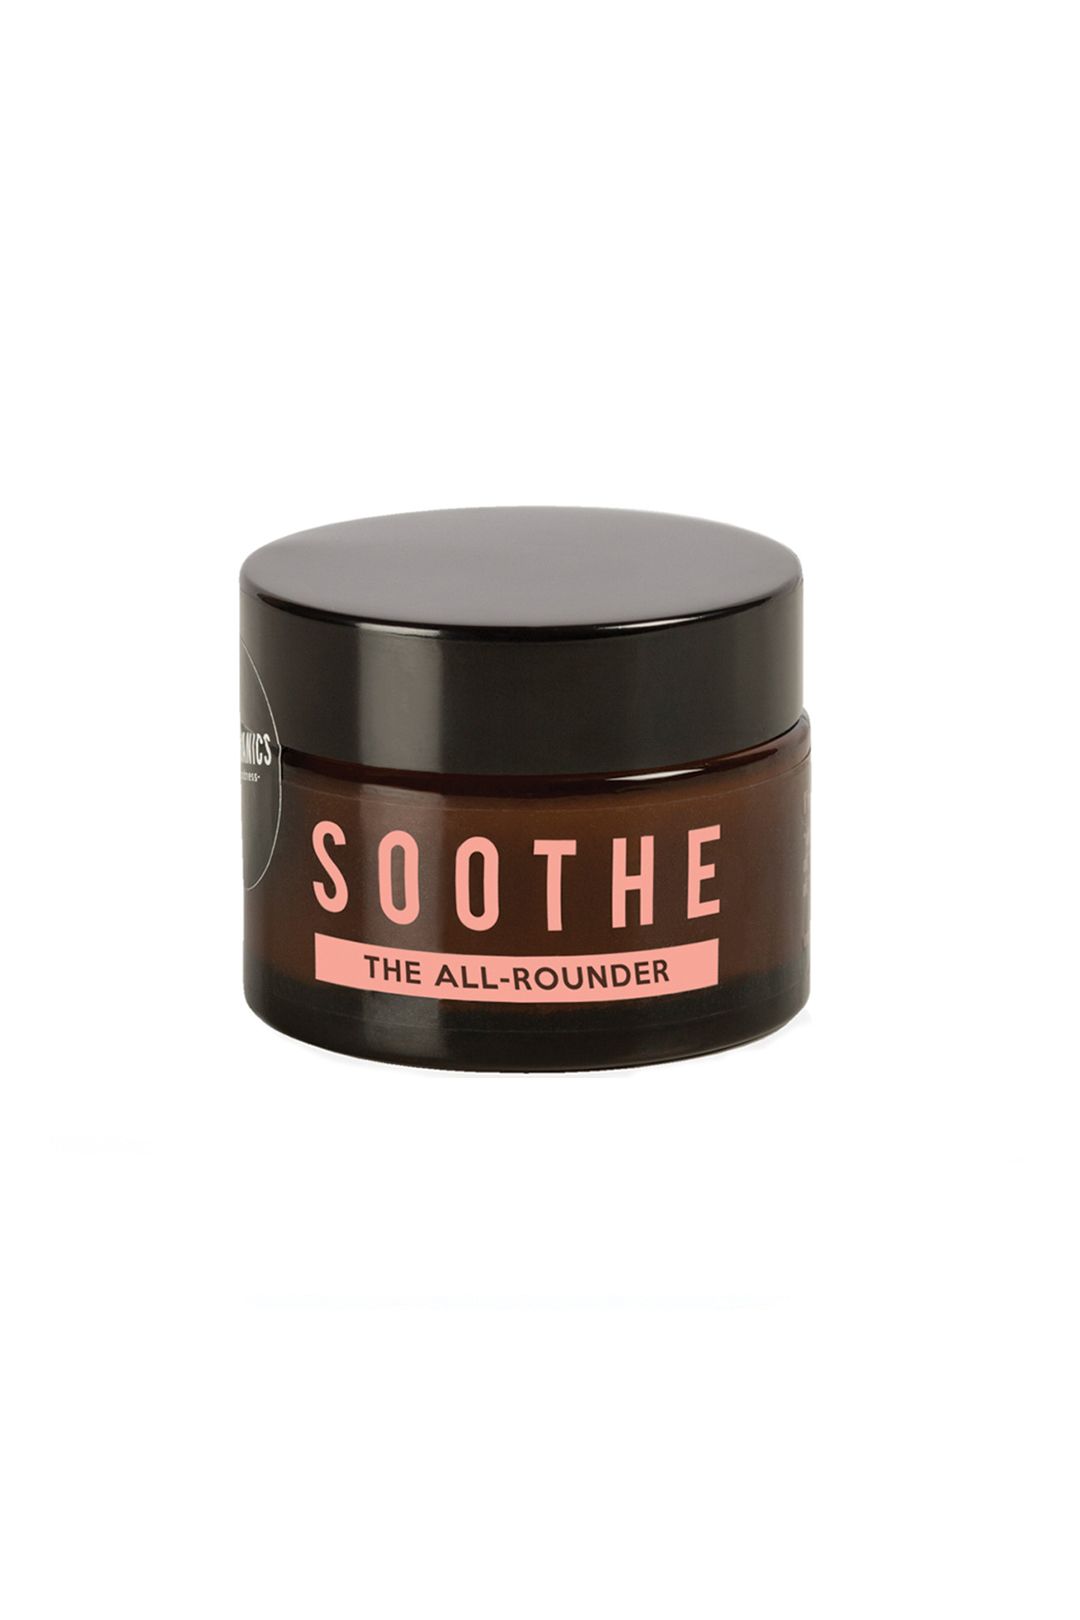 jak-organics-soothe-the-all-rounder-skin-balm-40ml